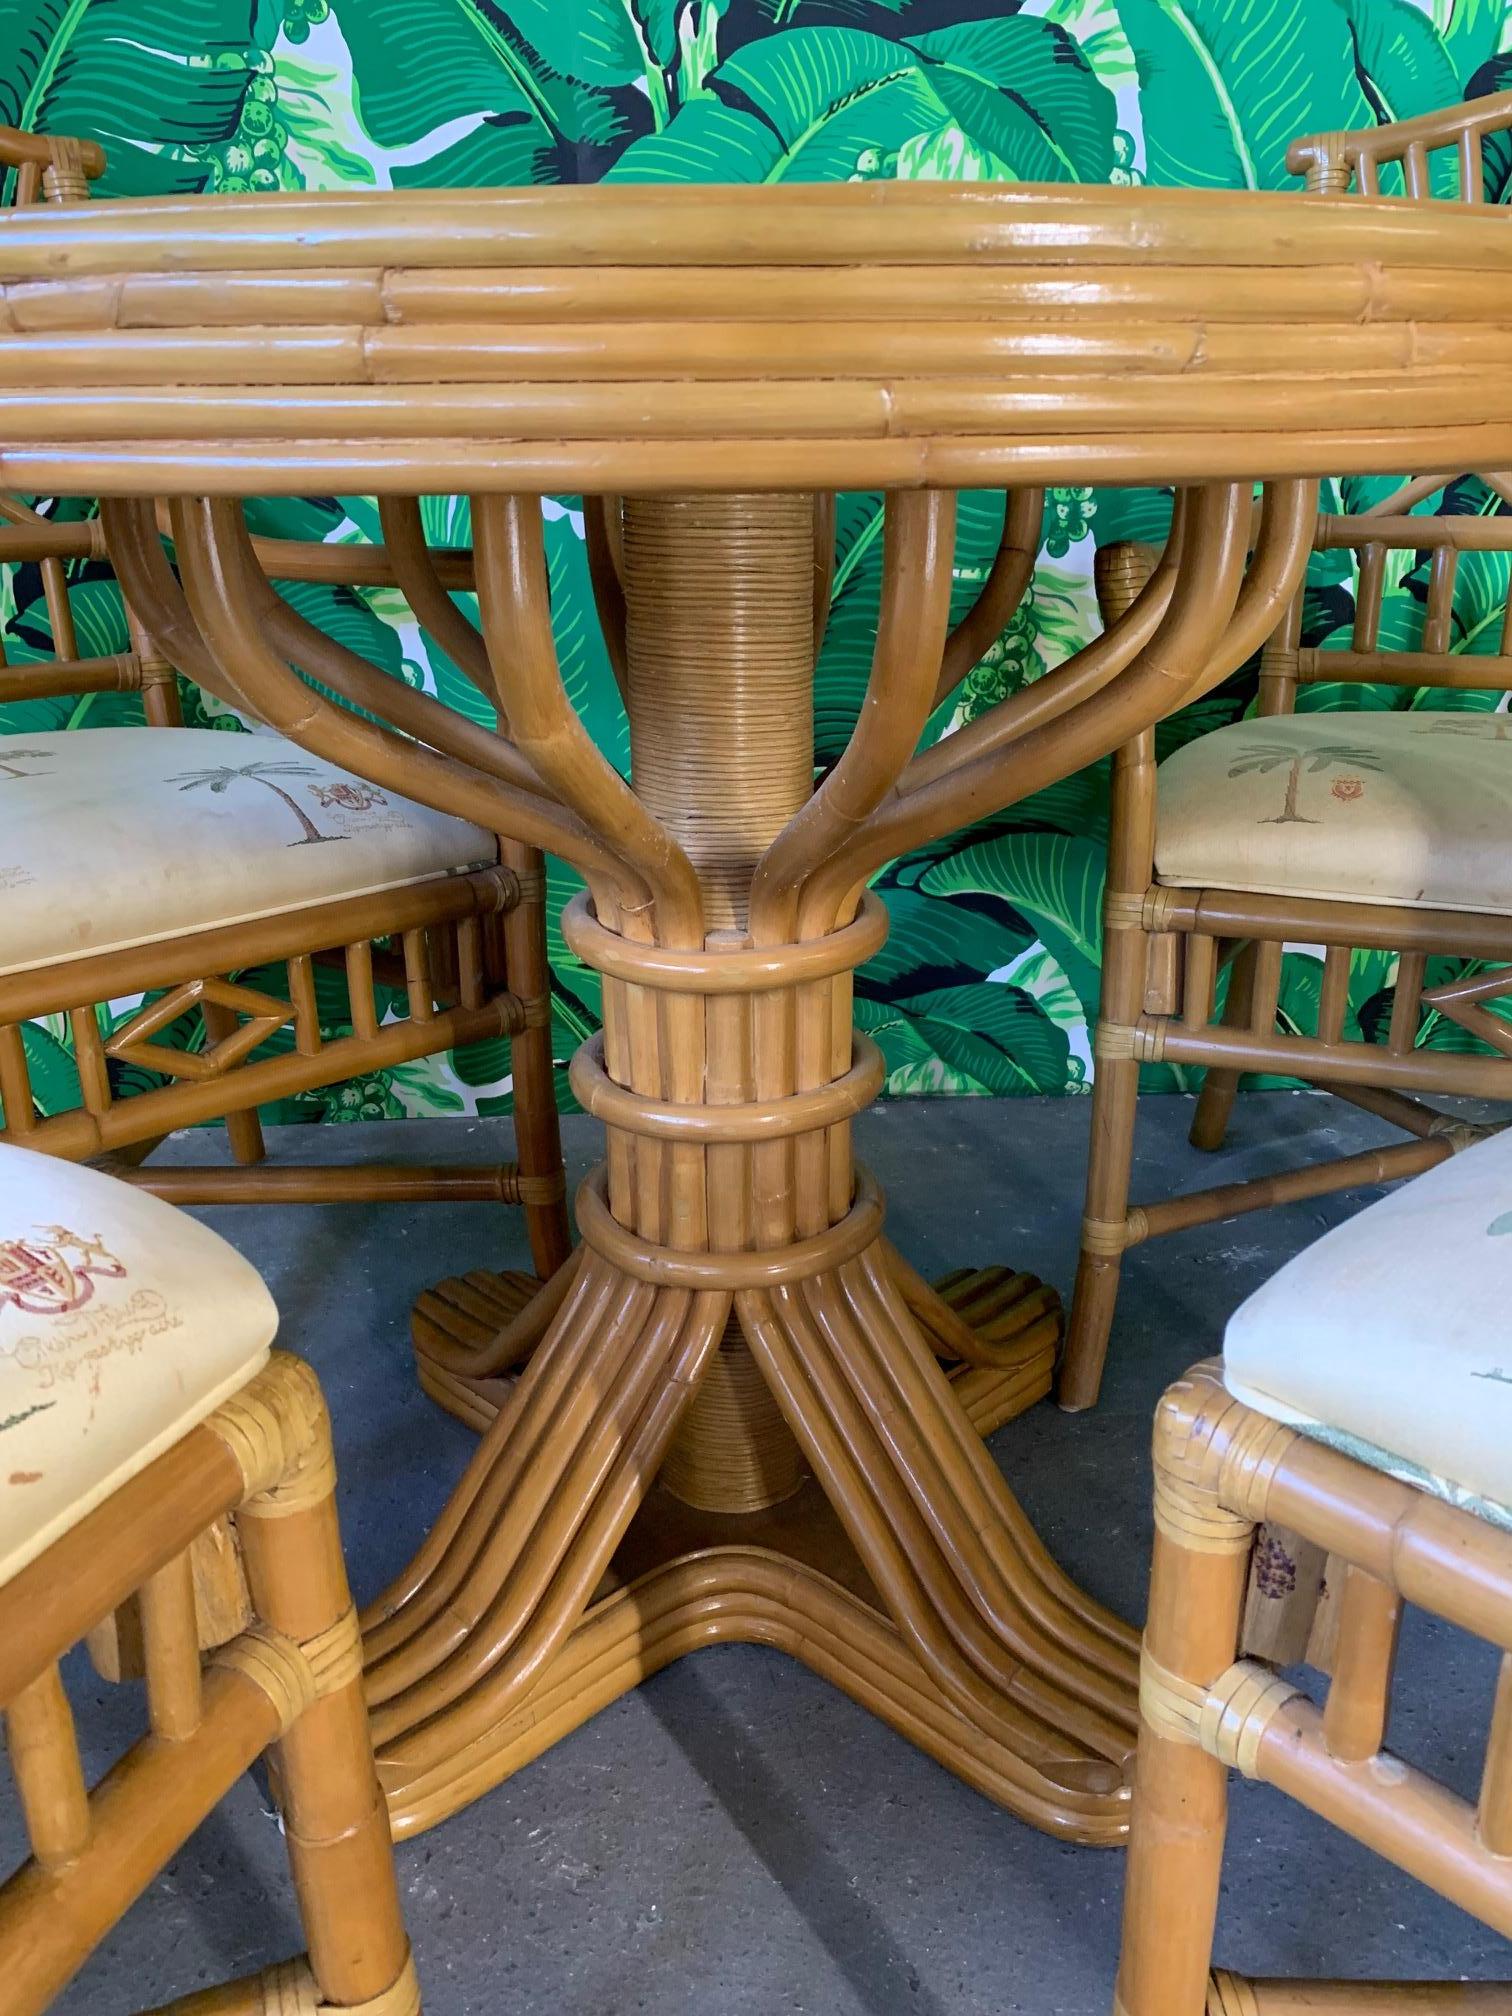 Vintage rattan dining set includes table and four chairs. Two armchairs and two side chairs. chinoiserie style design on chair backs, and woven rattan tabletop. Table and chairs in very good vintage condition, with minor imperfections consistent